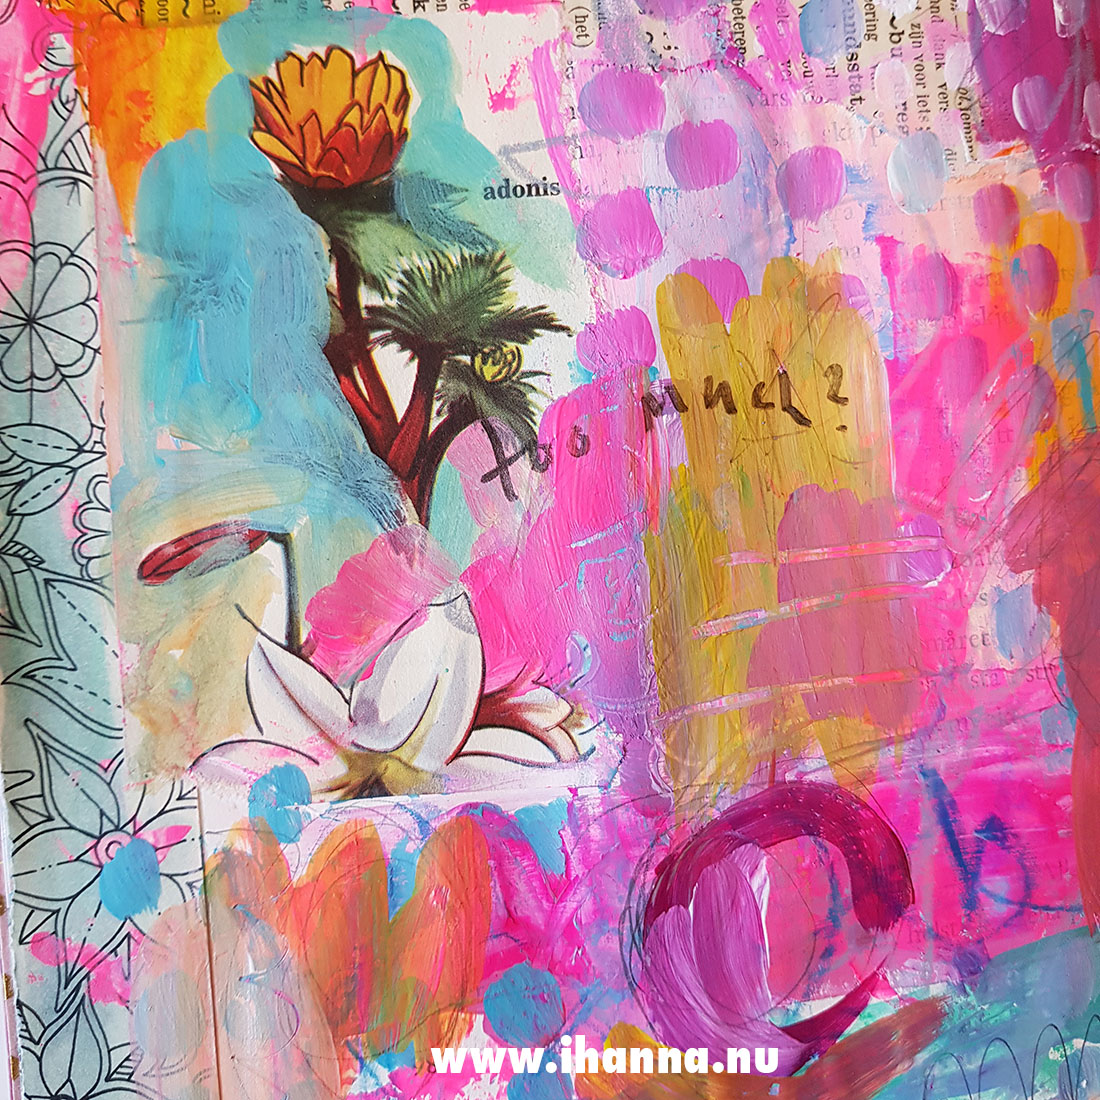 Never too much on a page by Hanna Andersson / iHanna #artjournaling